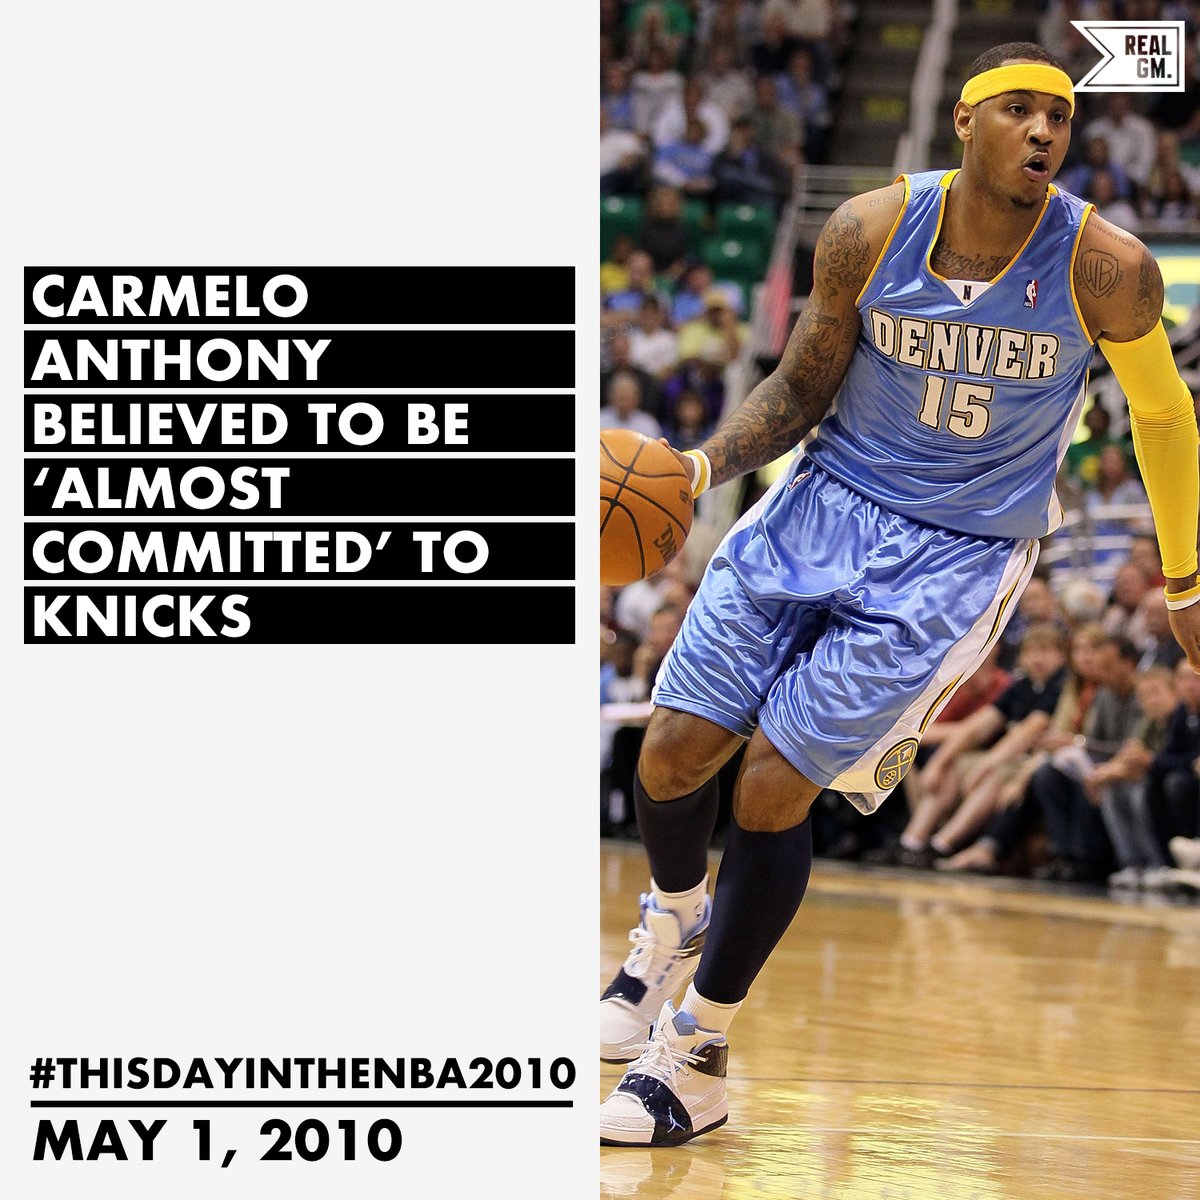  #ThisDayInTheNBA2010May 1, 2010Carmelo Anthony Believed To Be 'Almost Committed' To Knicks https://basketball.realgm.com/wiretap/203622/Carmelo-Anthony-Believed-To-Be-Almost-Committed-To-Knicks